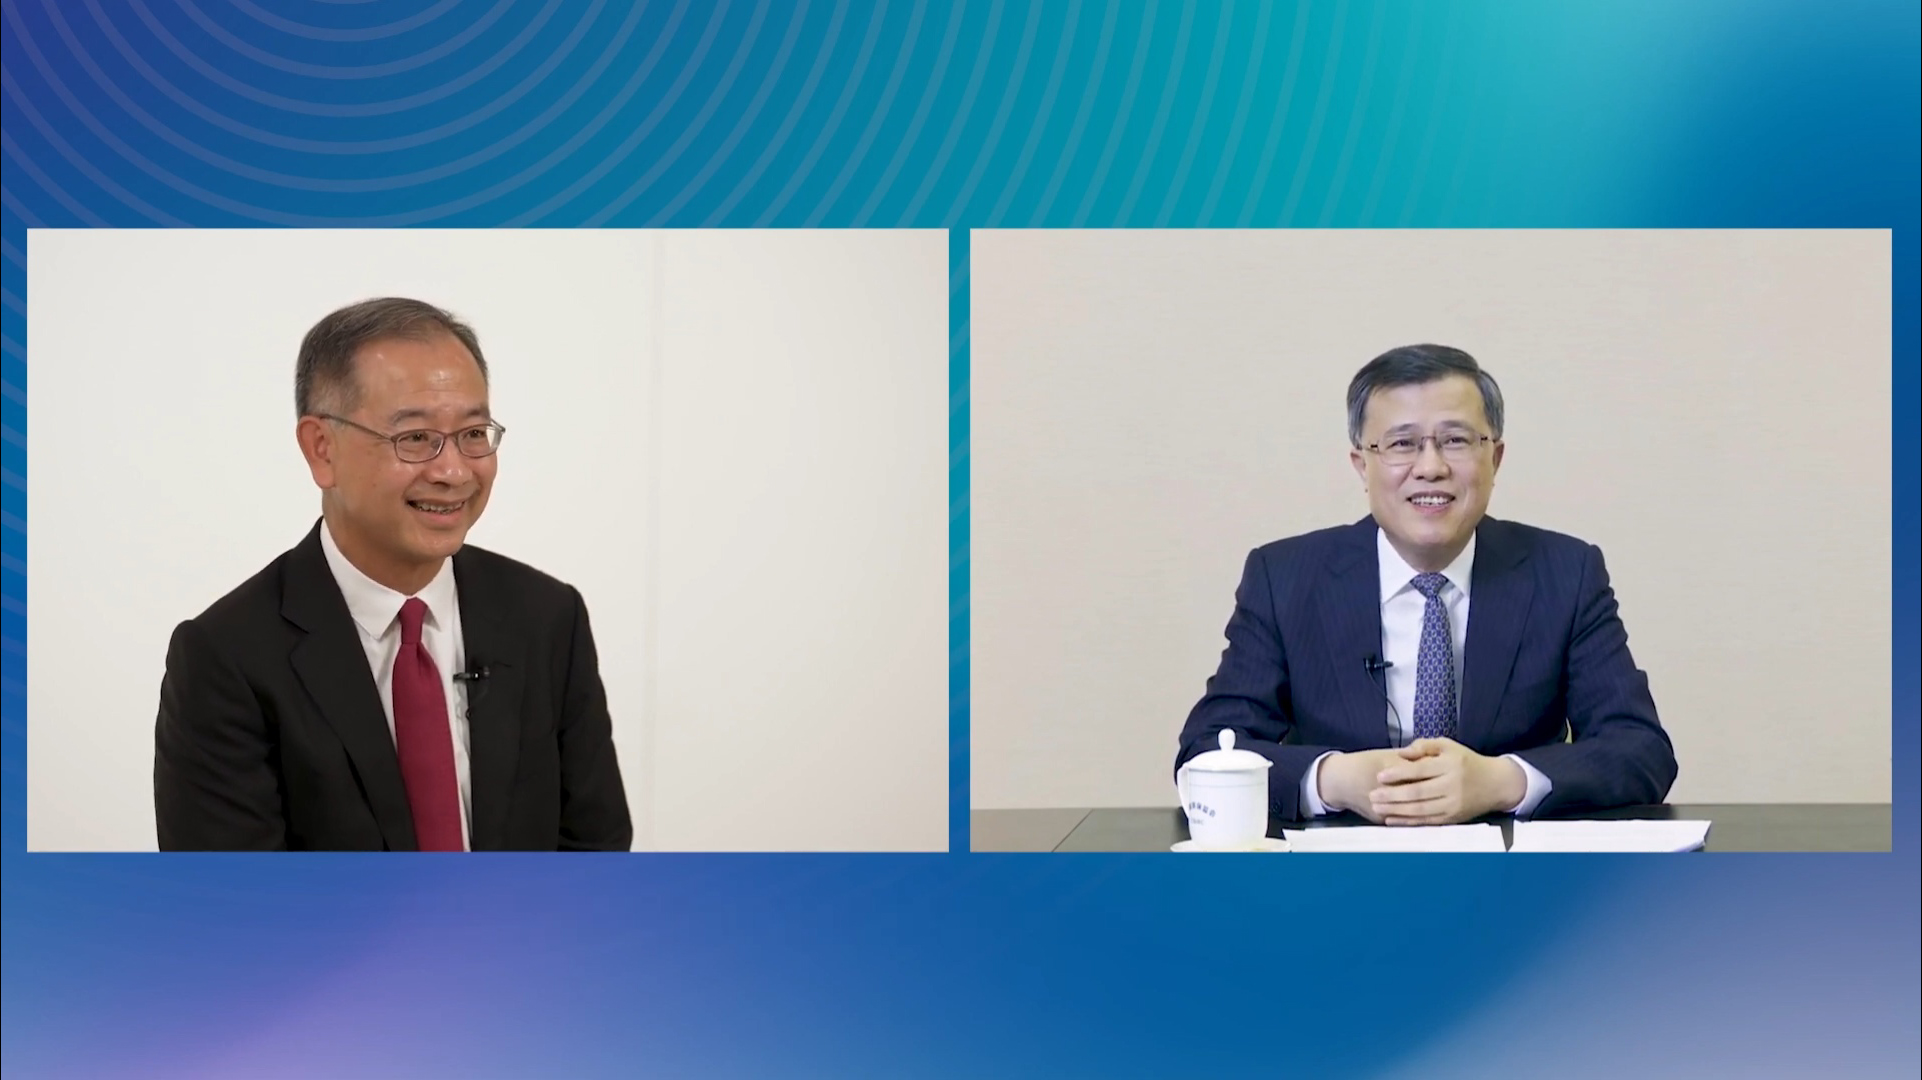 (From left to right) Eddie Yue, Chief Executive of Hong Kong Monetary Authority; XIAO Yuanqi, Vice Chairman of the China Banking and Insurance Regulatory Commission